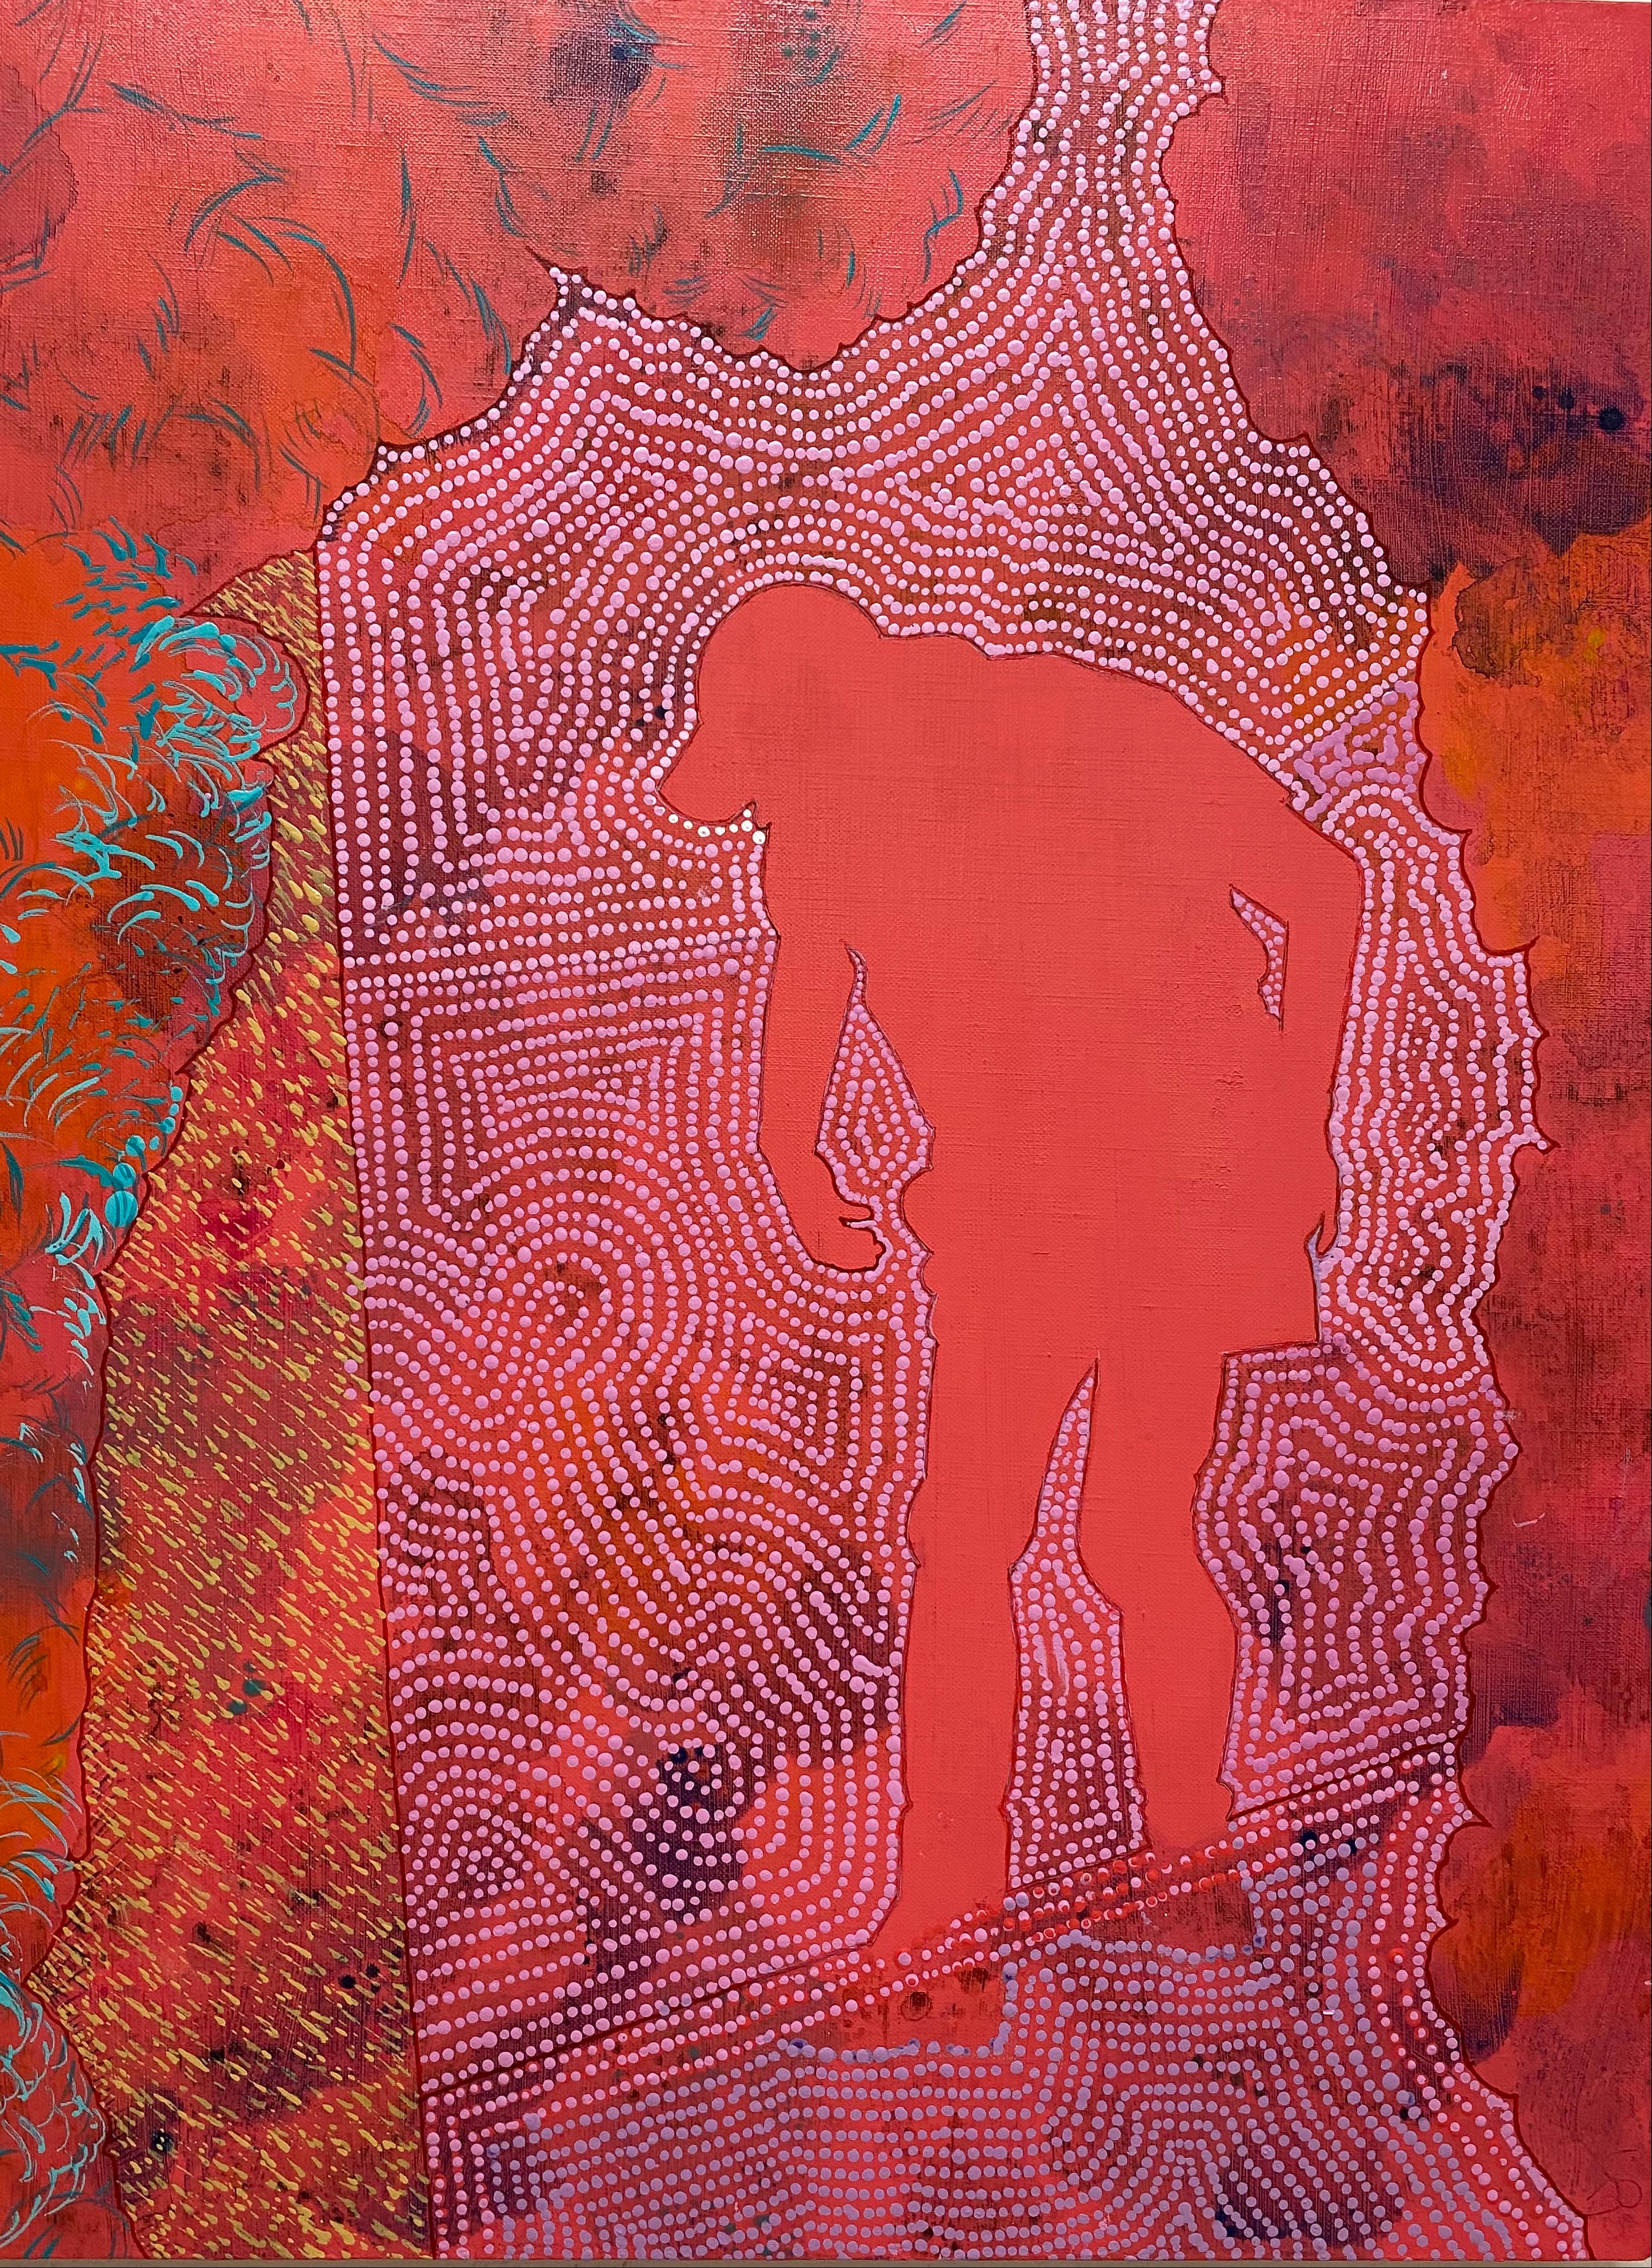 Barbara Strasen Figurative Painting - S-FIRST, red, figurative, patterned, abstract